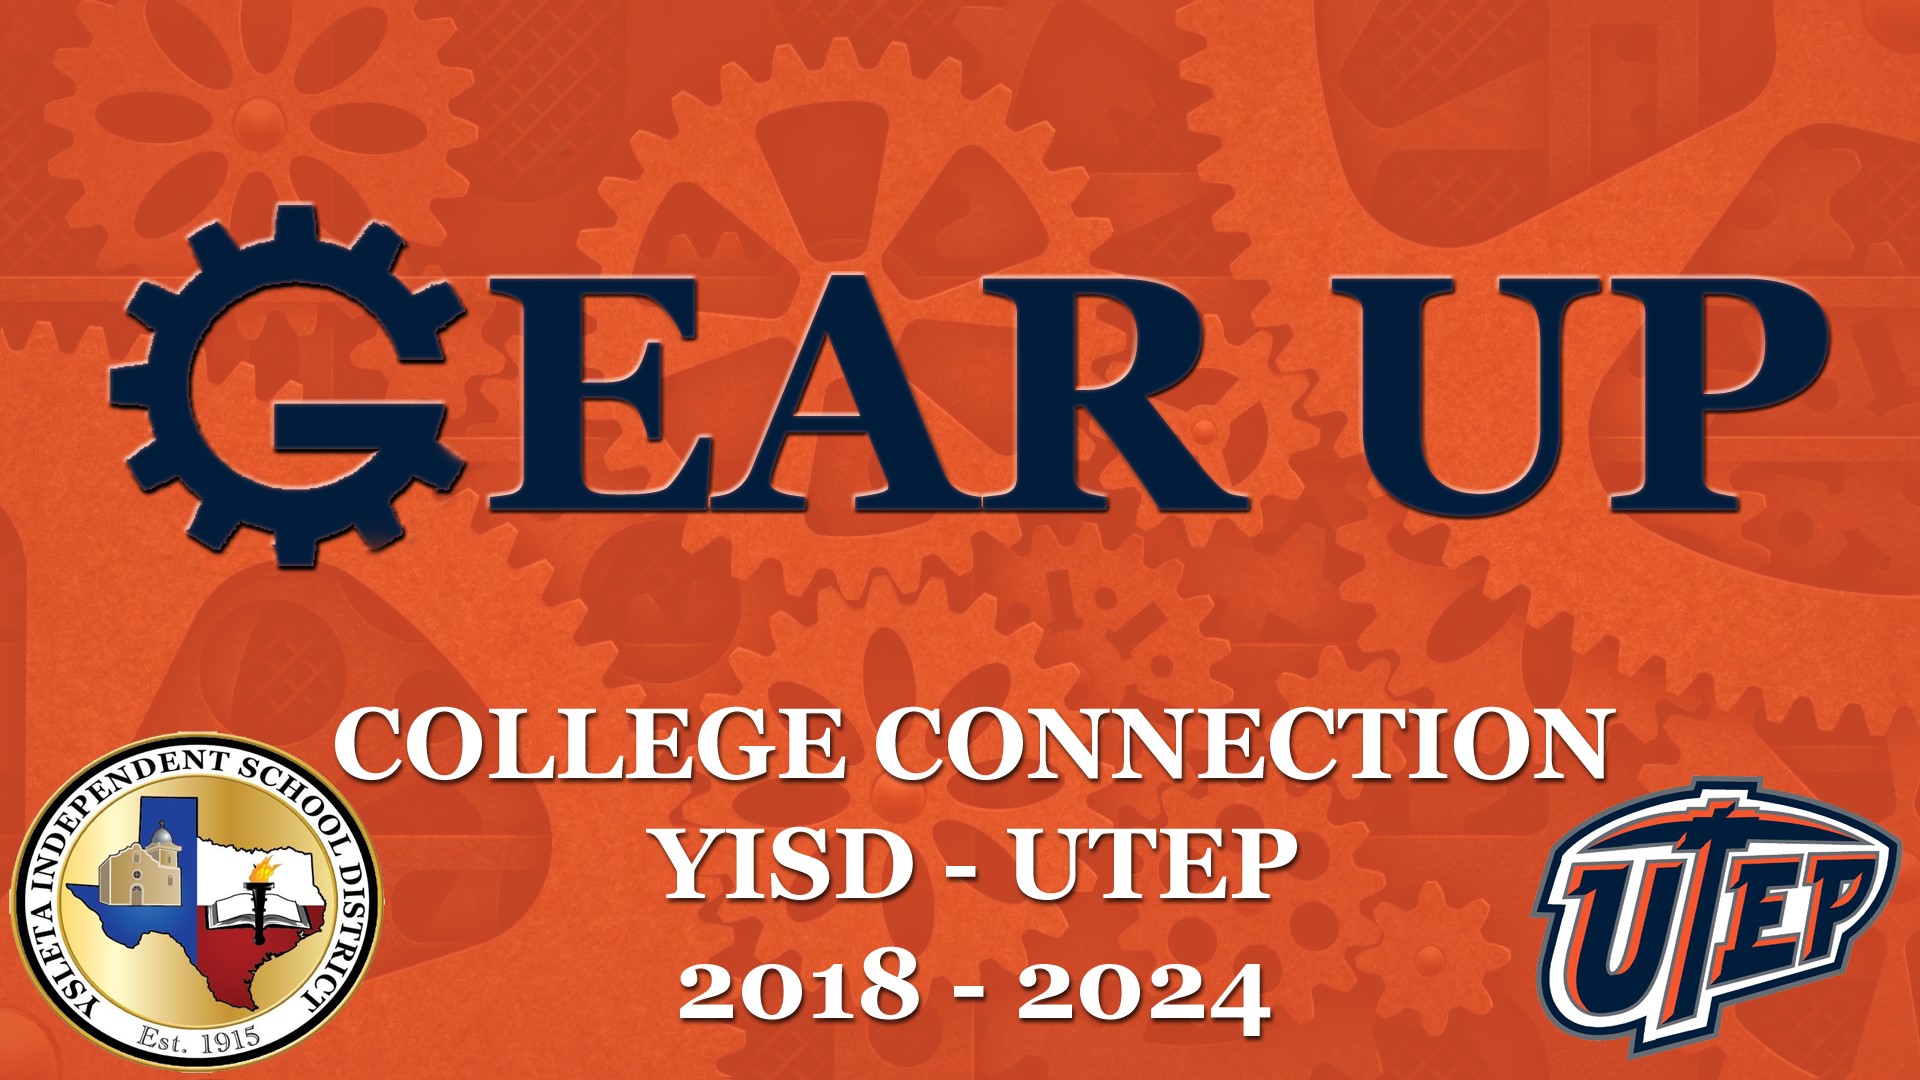 GEAR UP COLLEGE CONNECTION YISD-UTEP  2018-2024